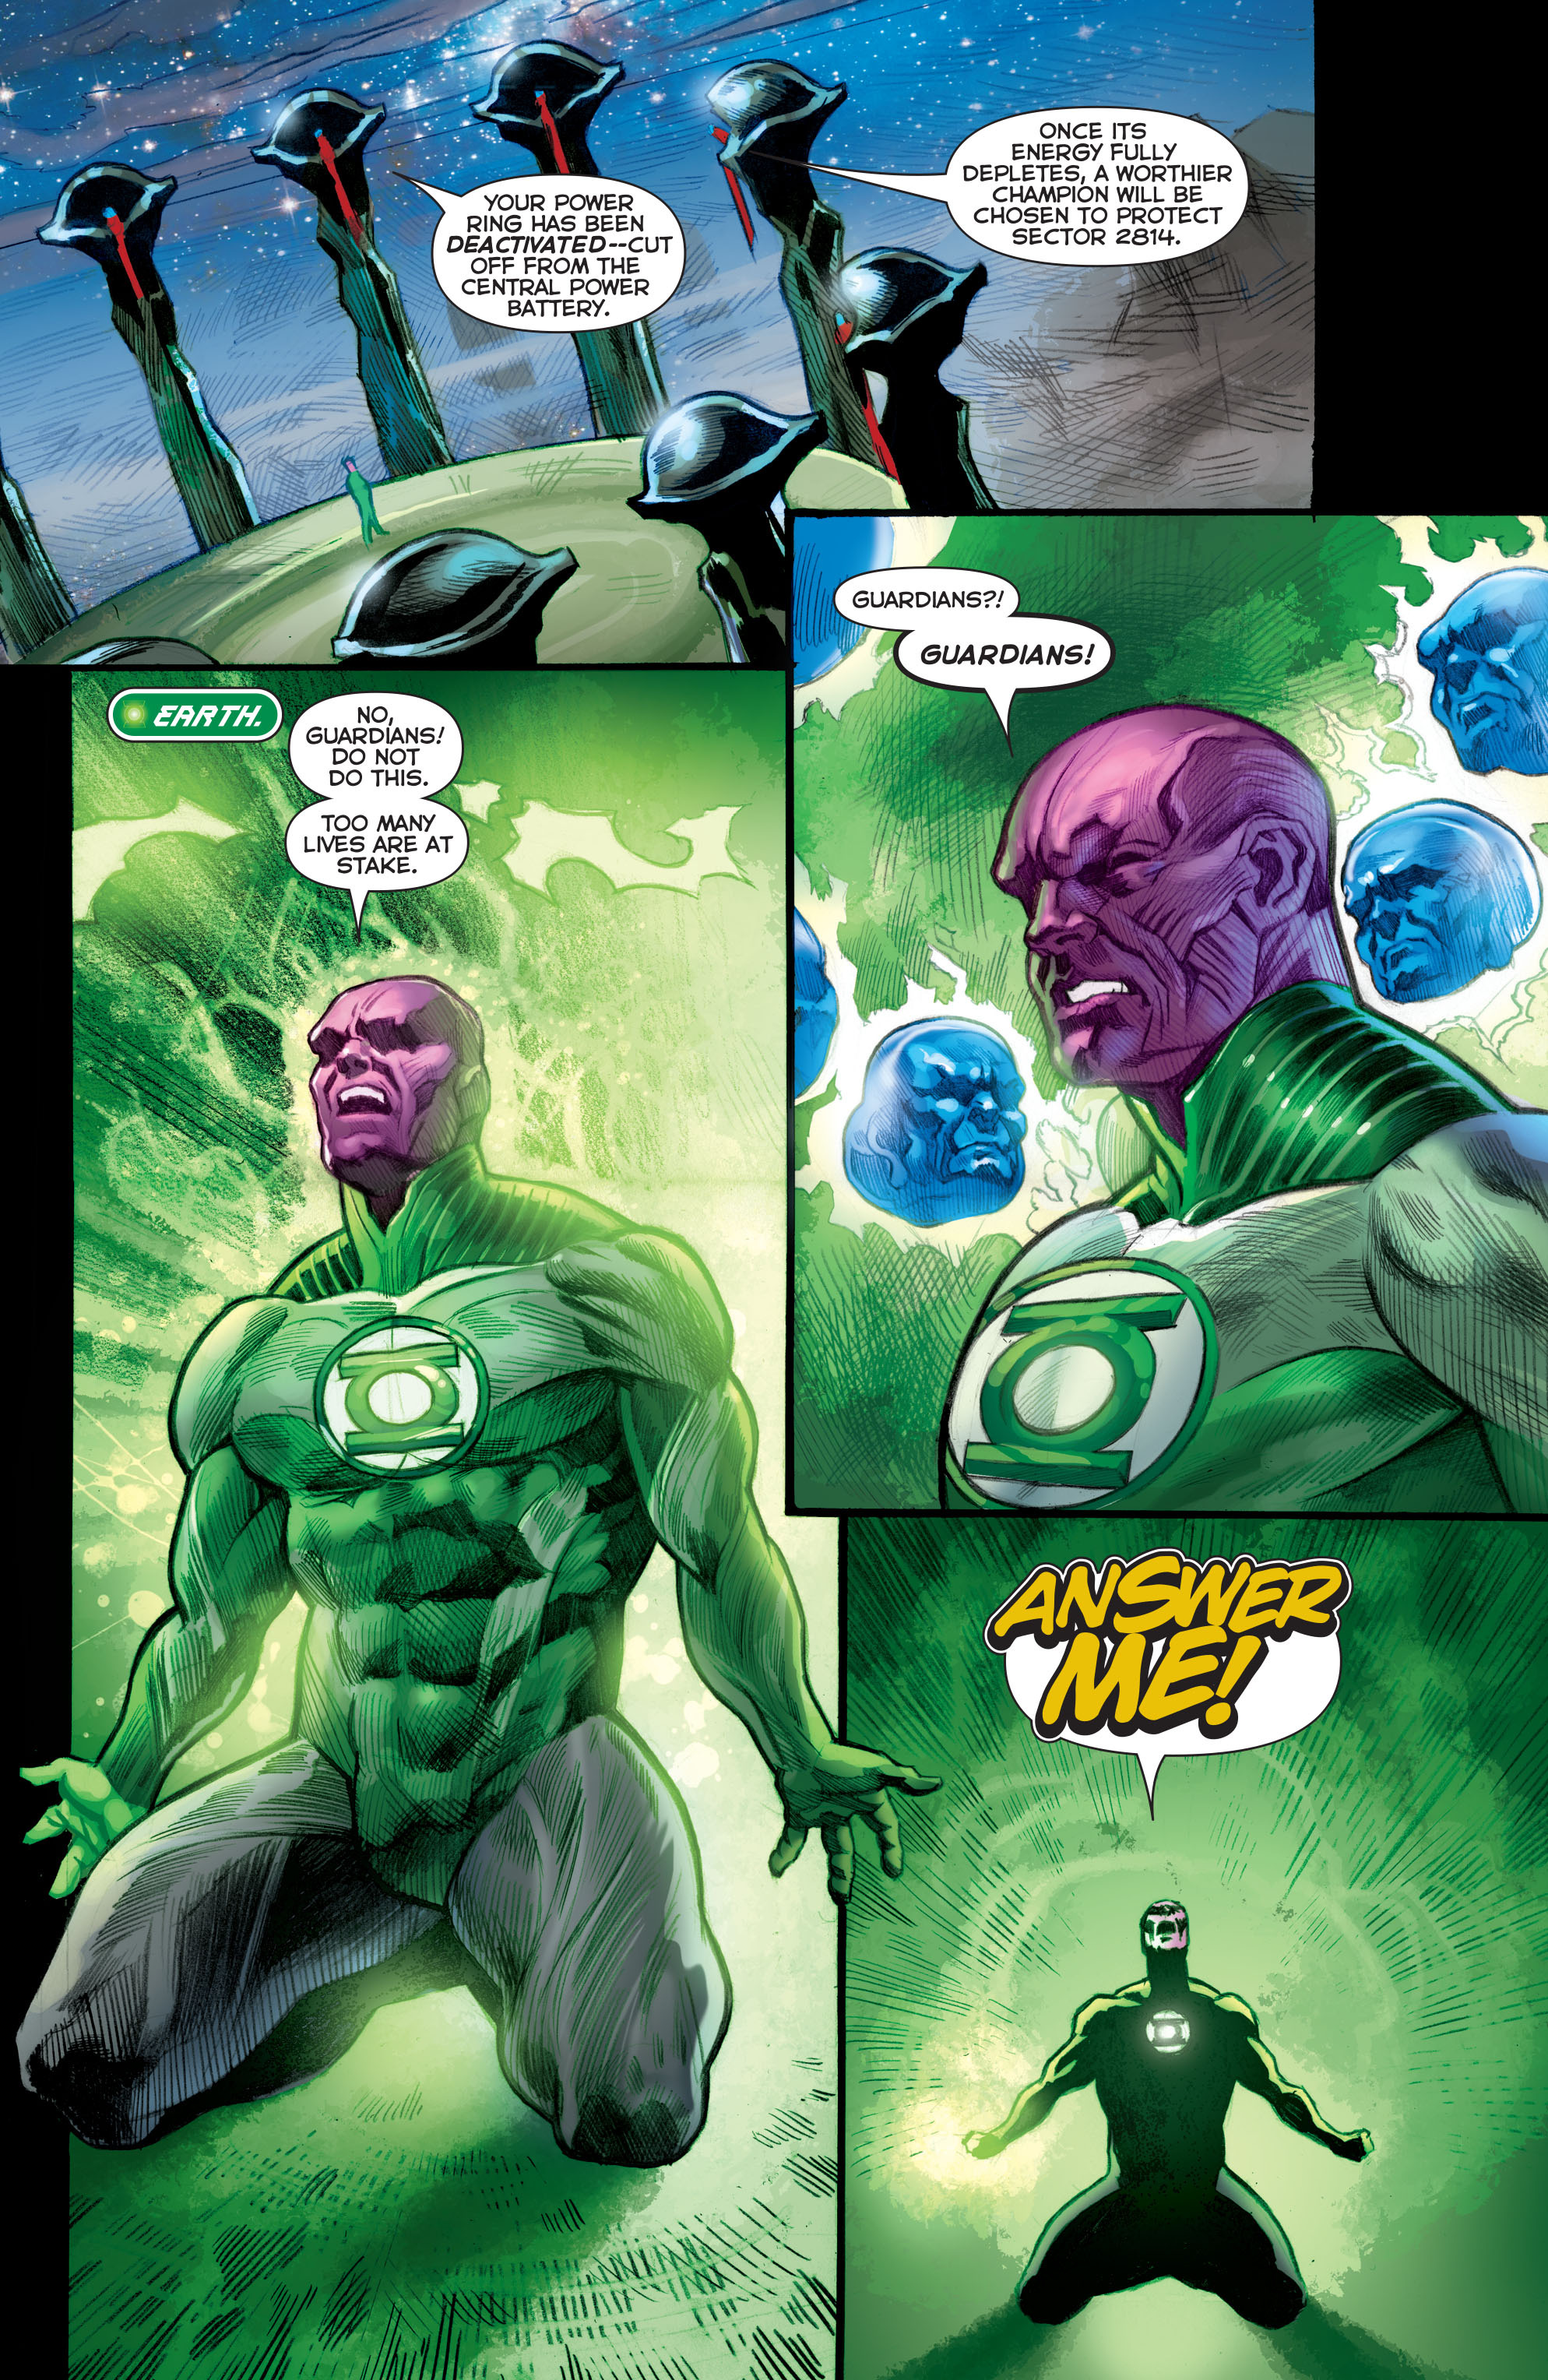 Flashpoint: The World of Flashpoint Featuring Green Lantern Full #1 - English 53